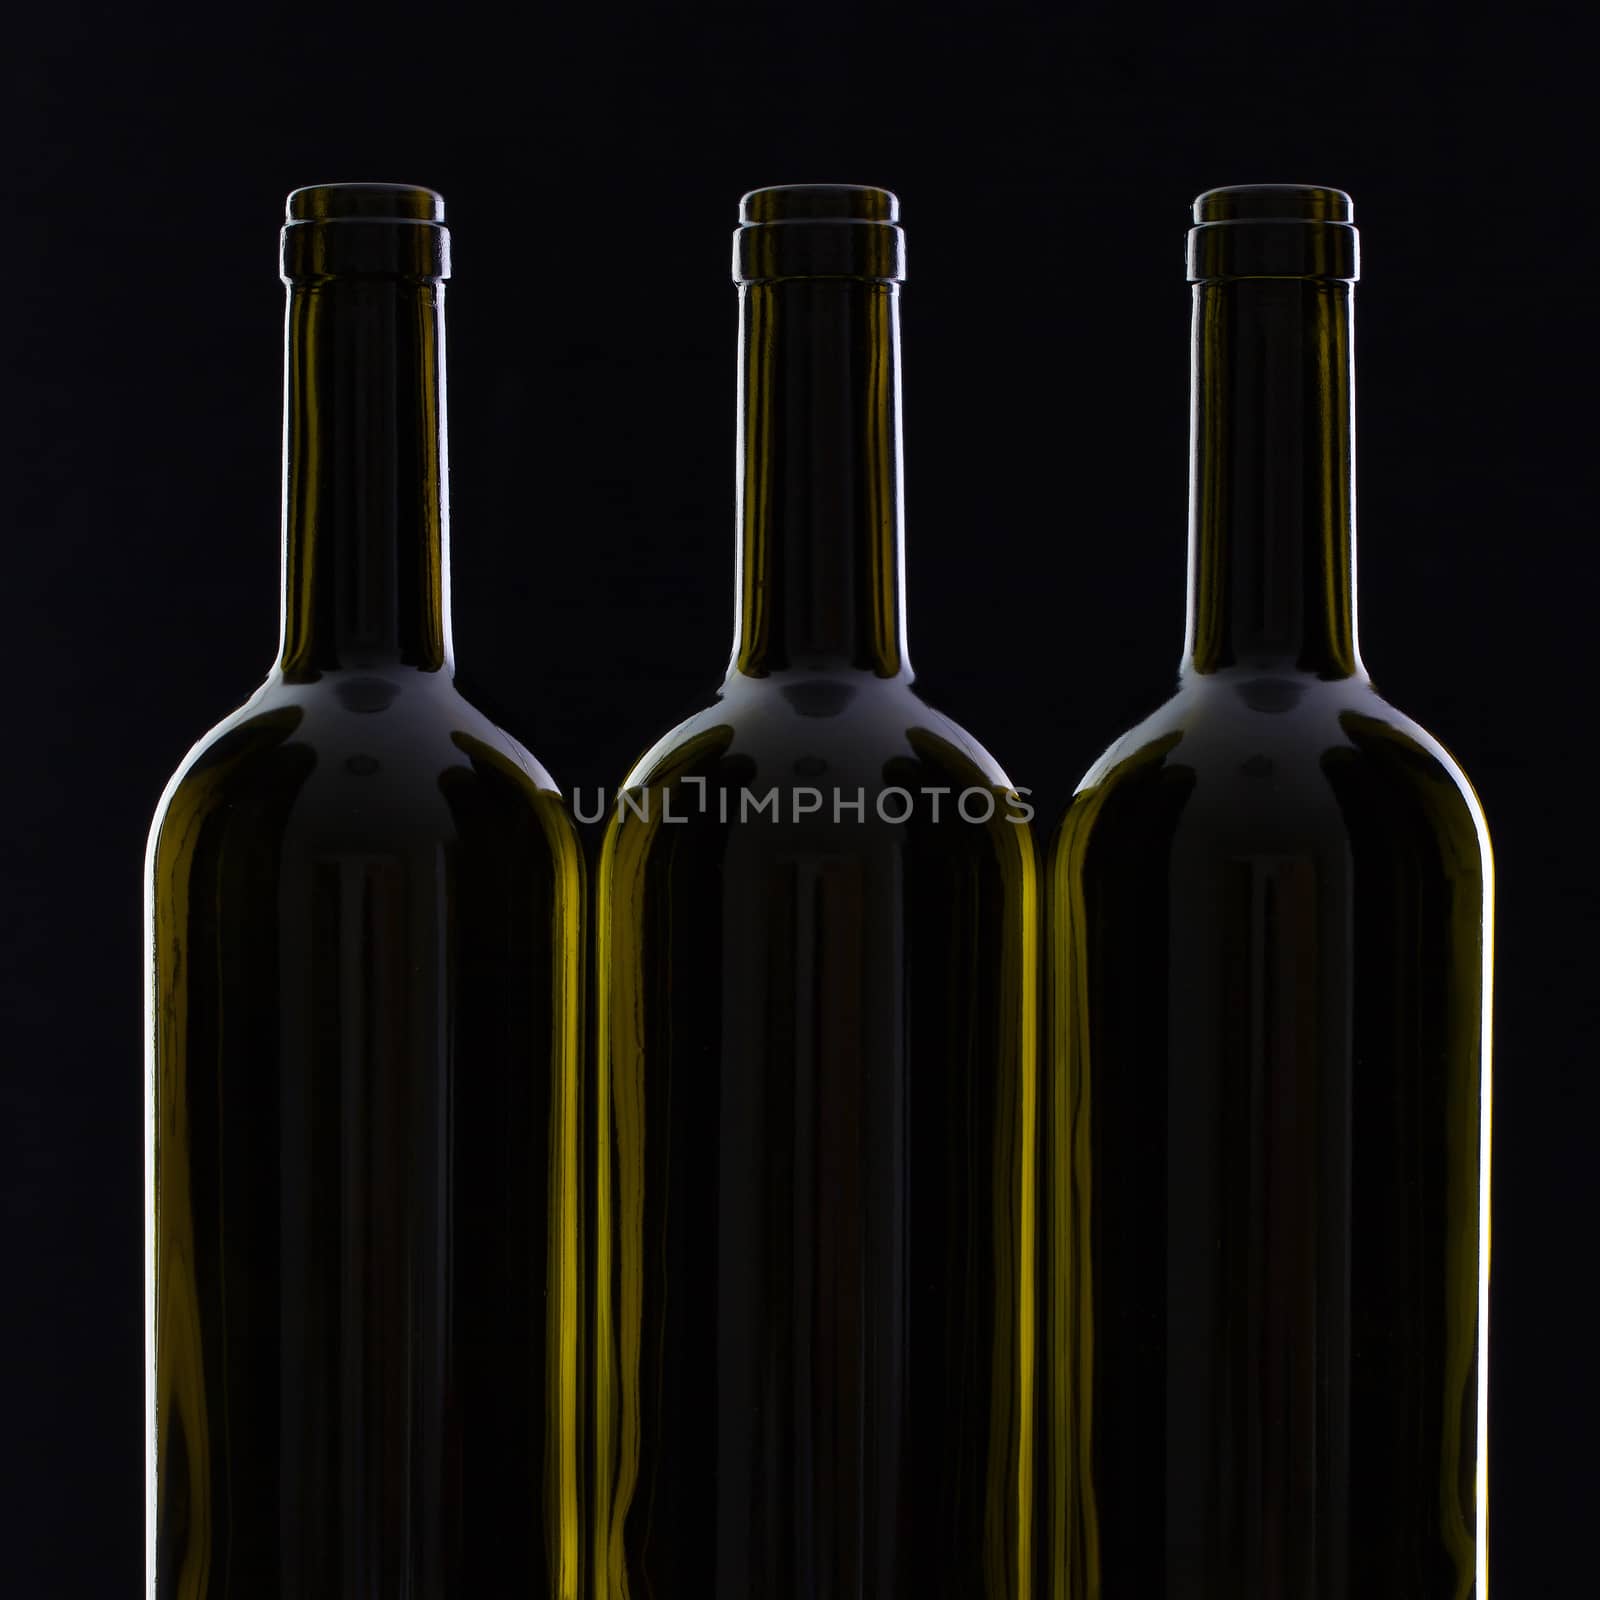 Three different bottles of wine on the black glass.